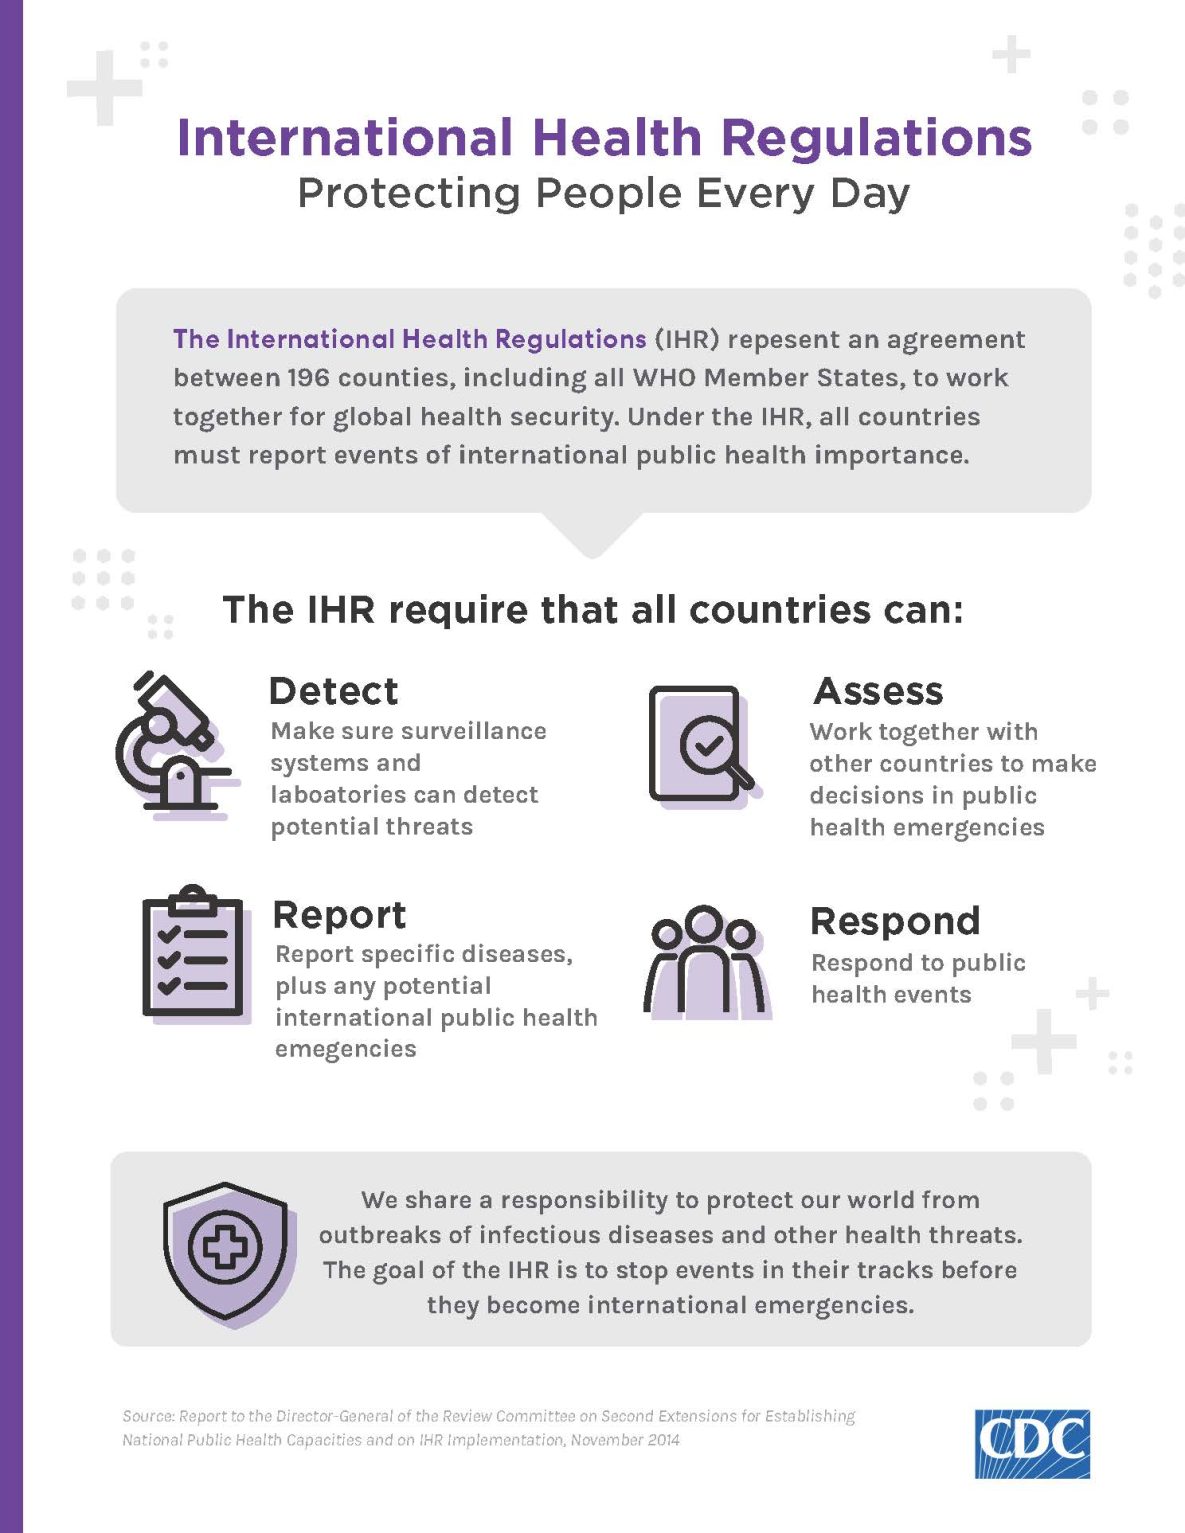 International Health Regulations, Protecting People Everyday infographic